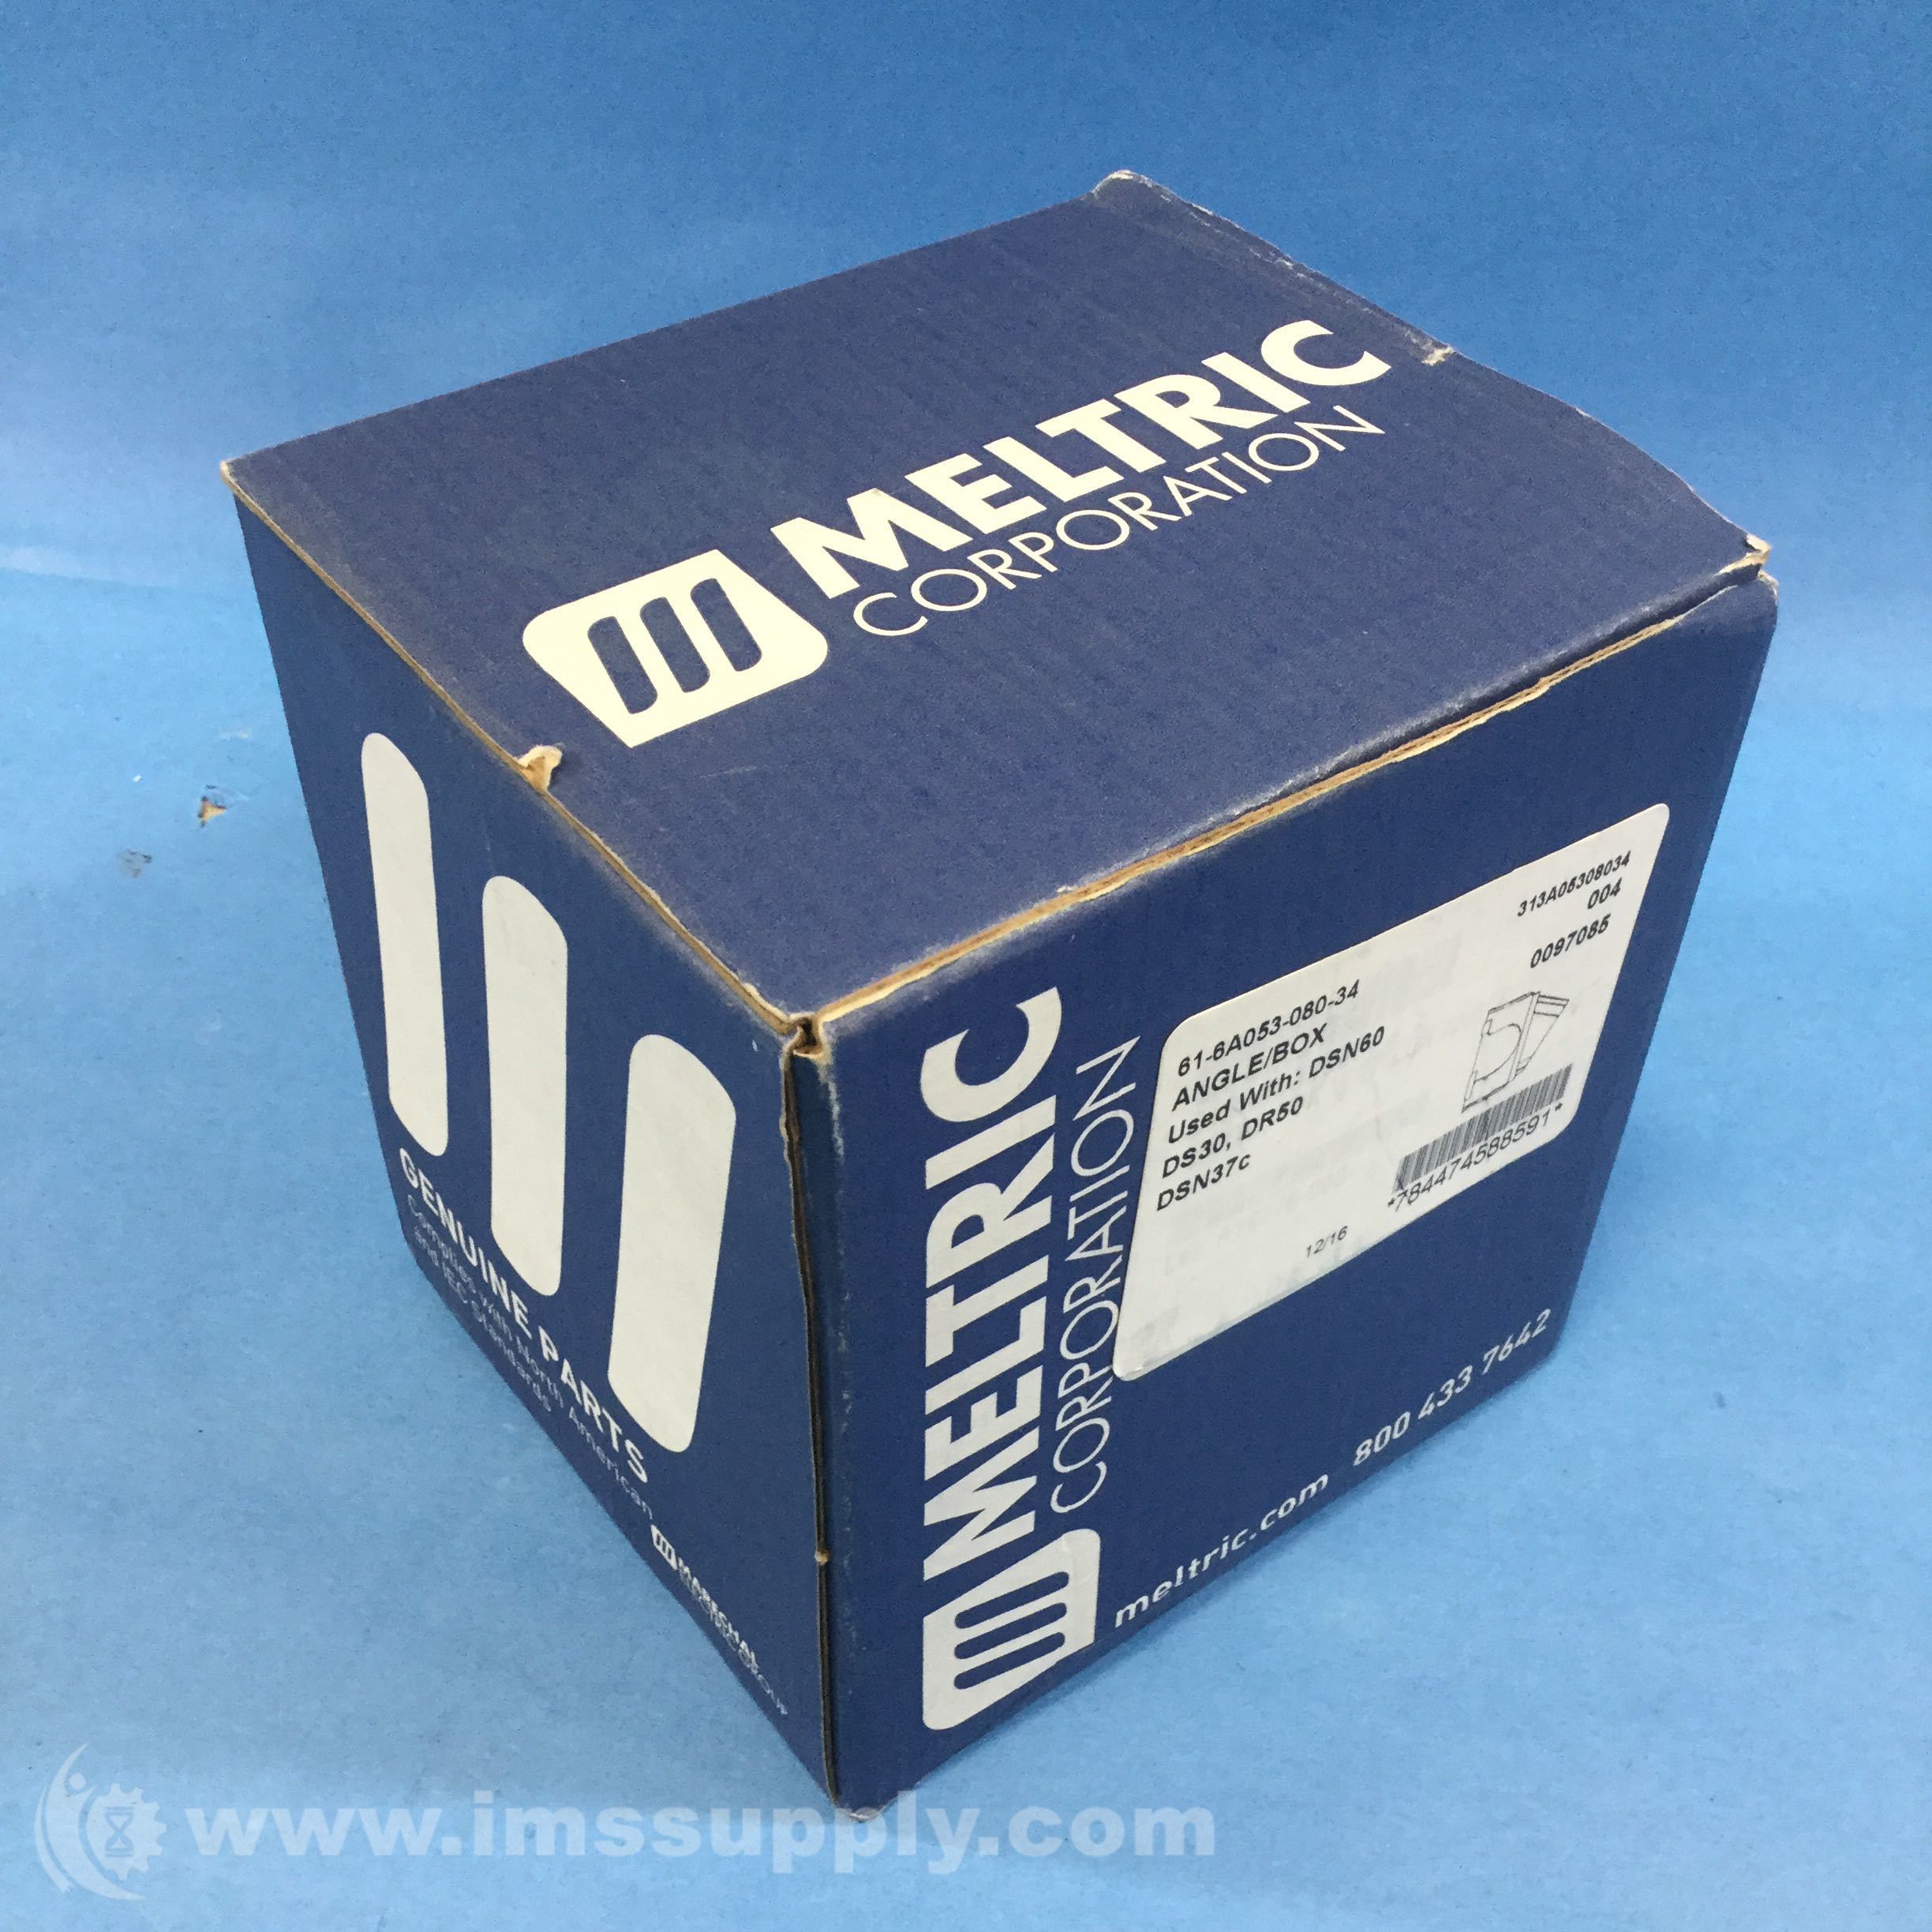 Meltric Corp 61-6A053-080-12 Junction Box Dsn60 Plug/Recep Angled Application